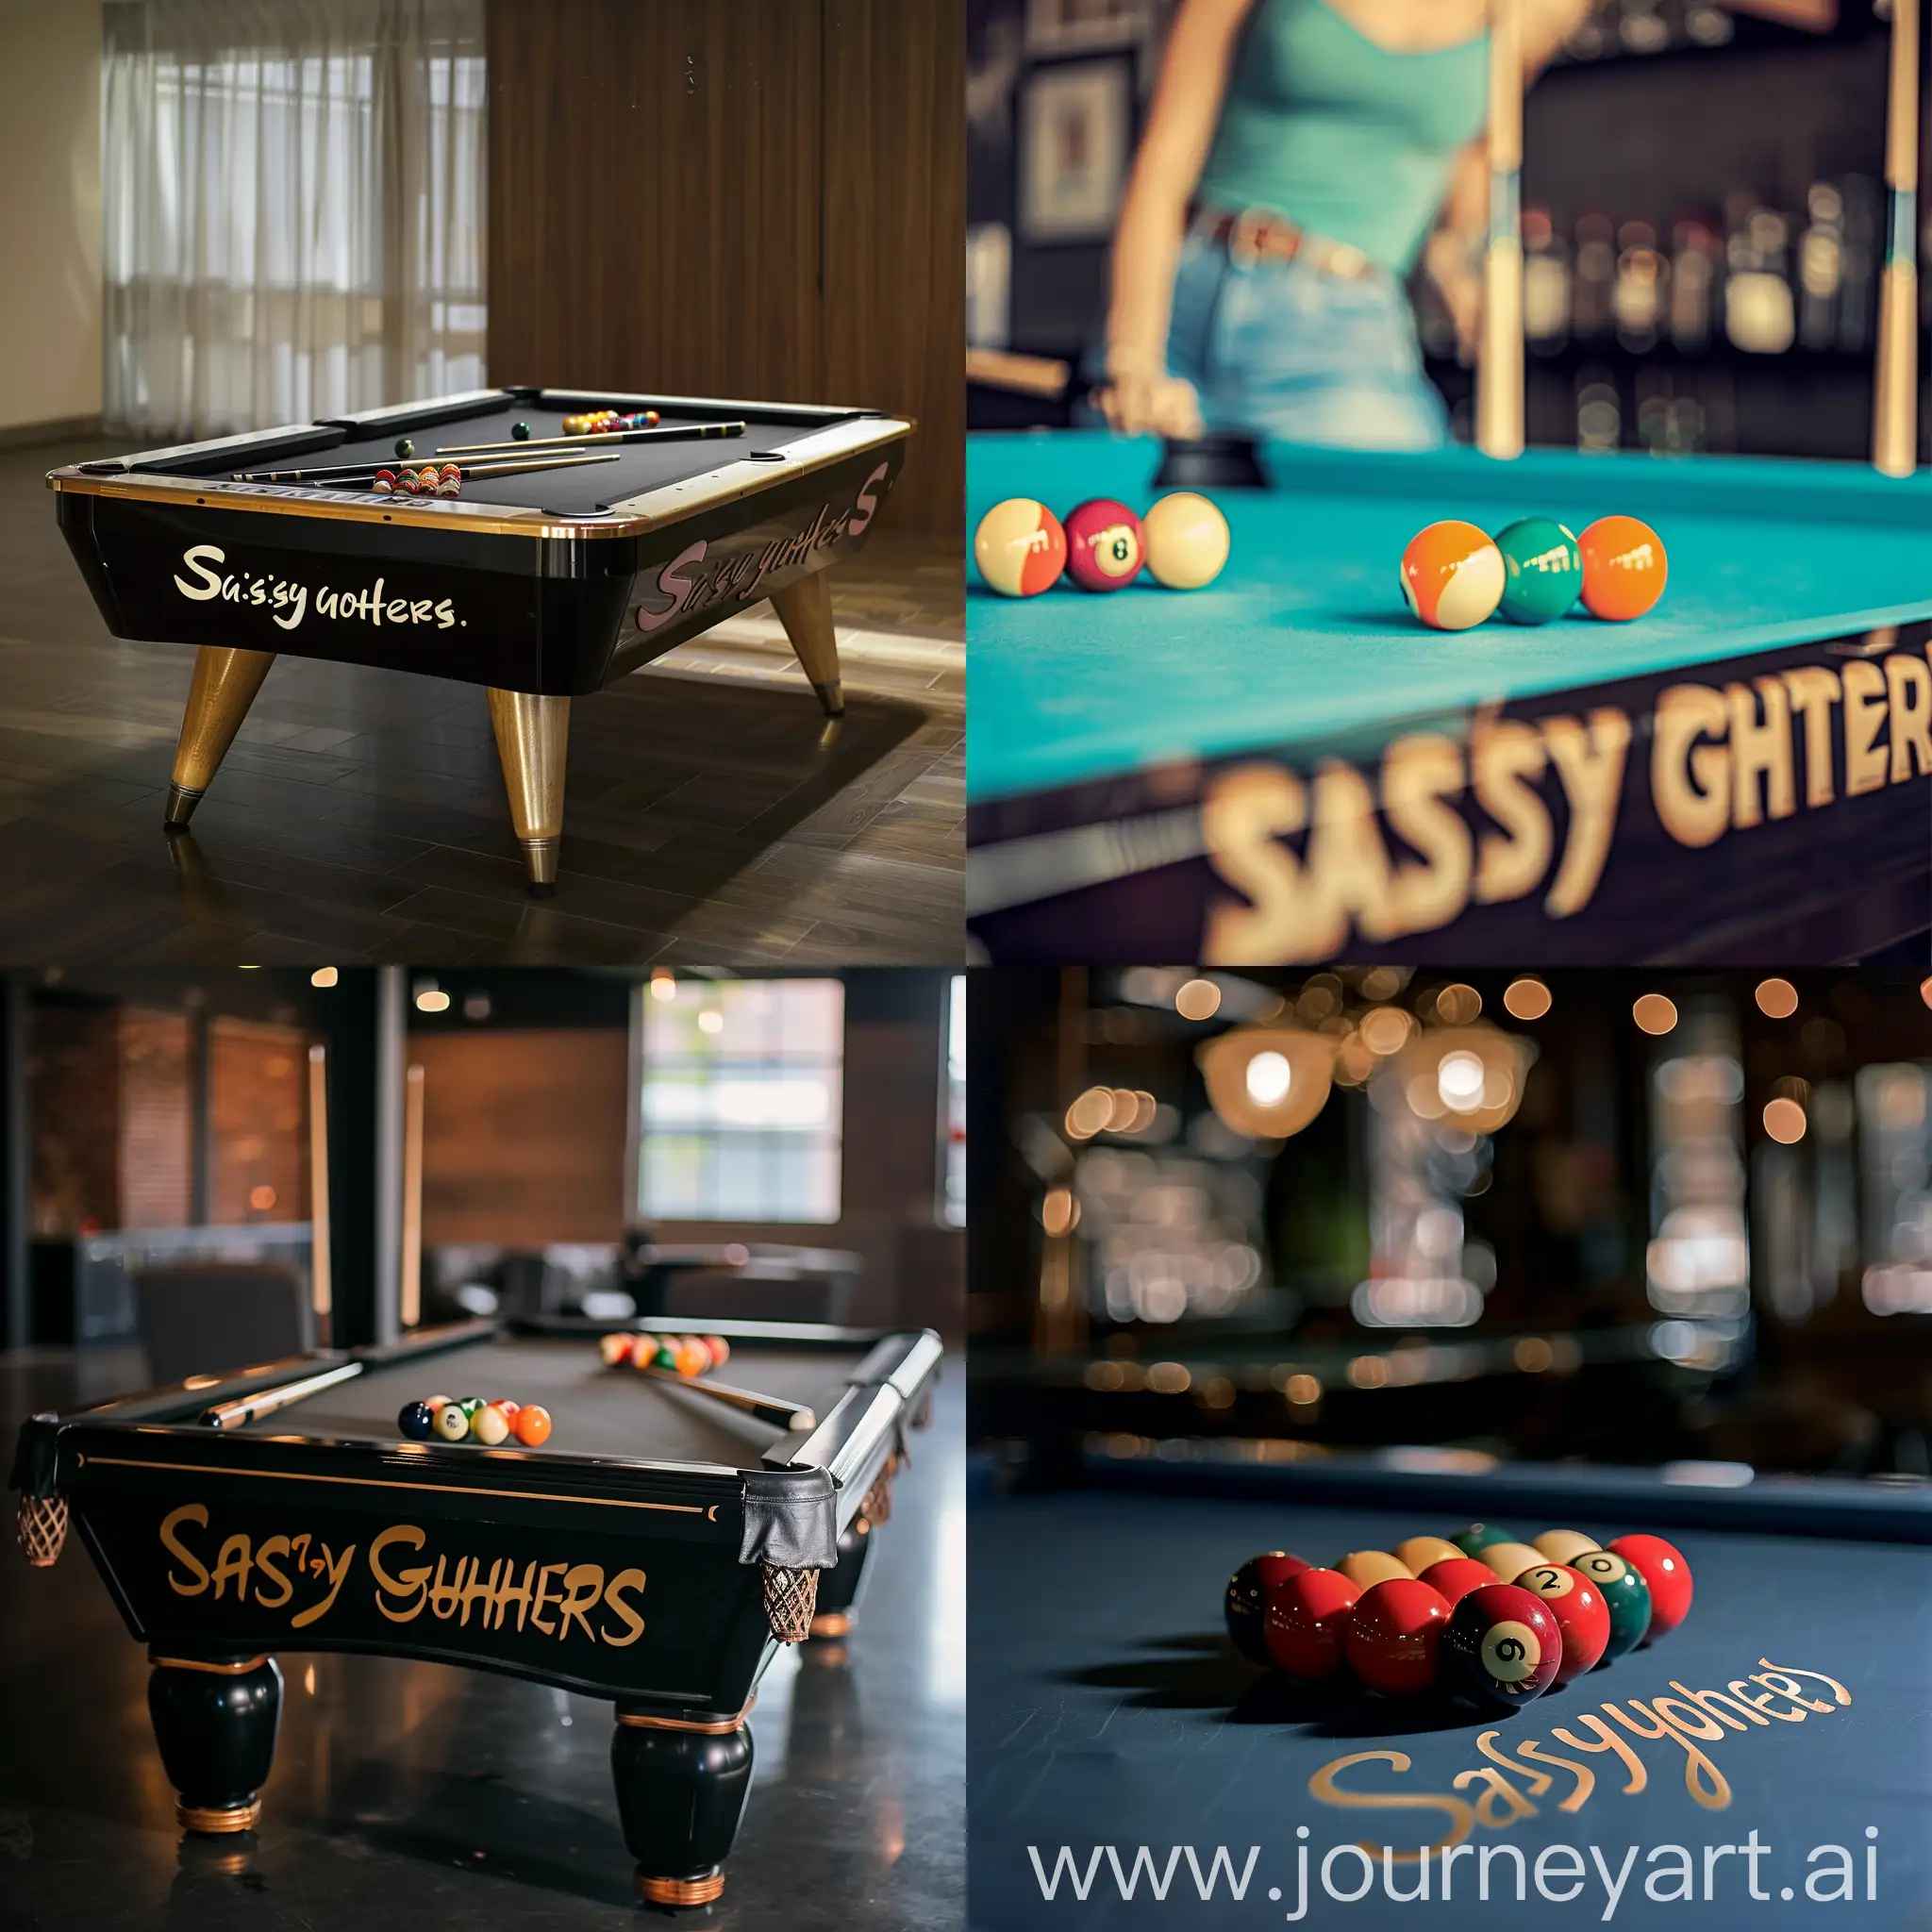 Pool table with lettering ‘Sassy Shooters’